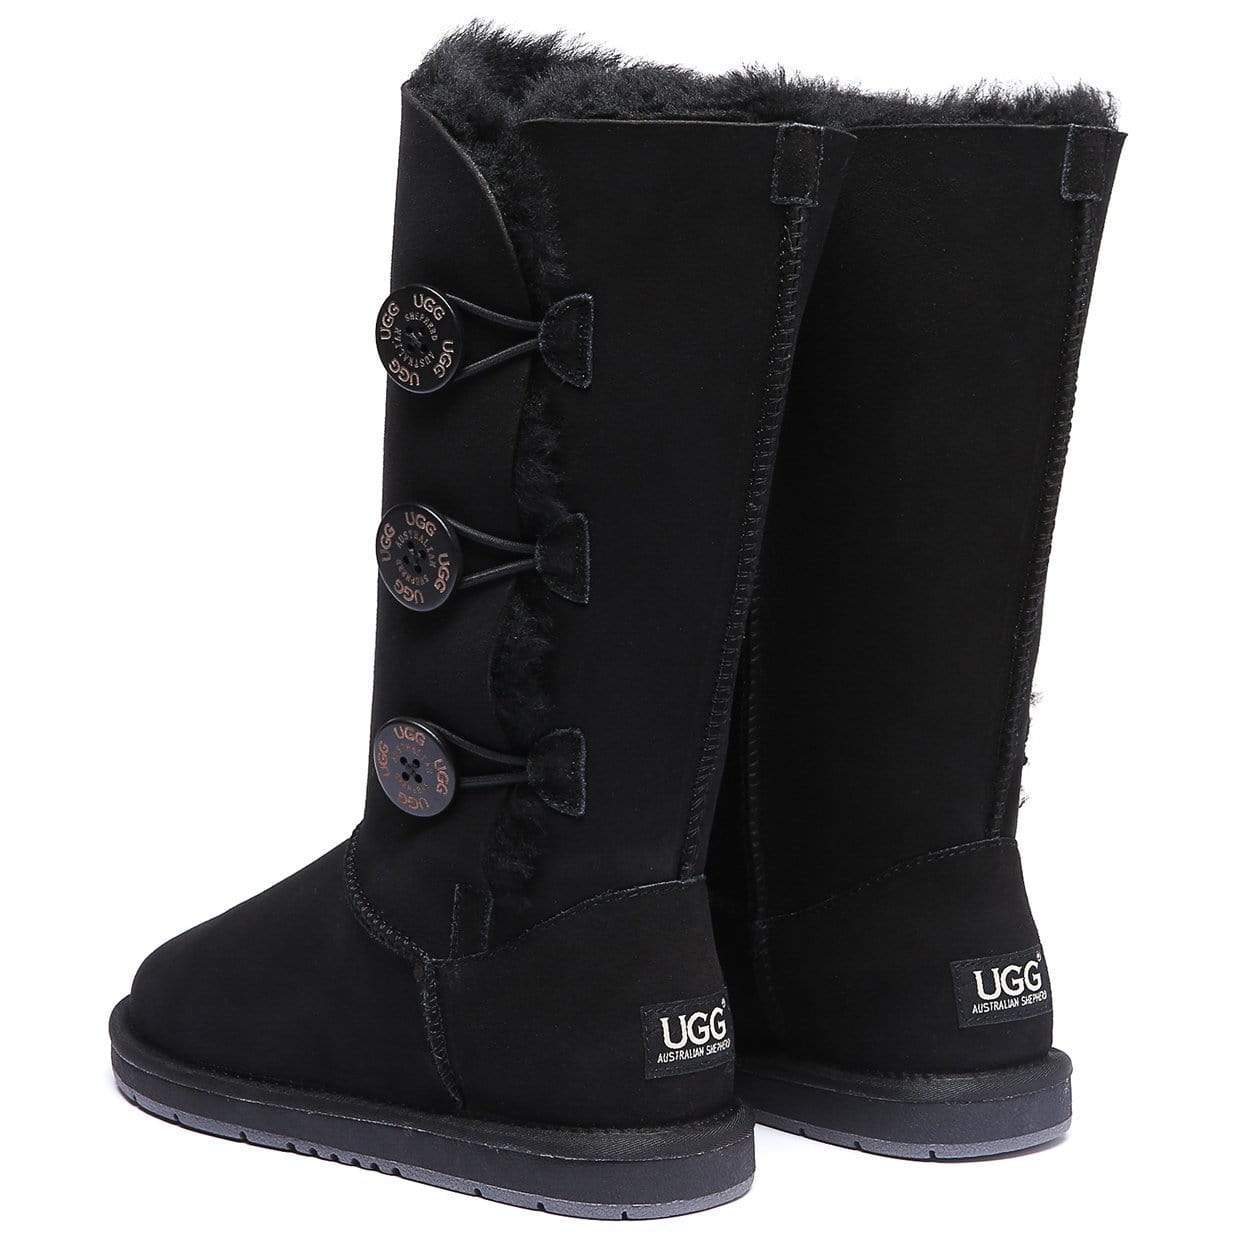 Classic Tall 3-Buttons UGG Boots